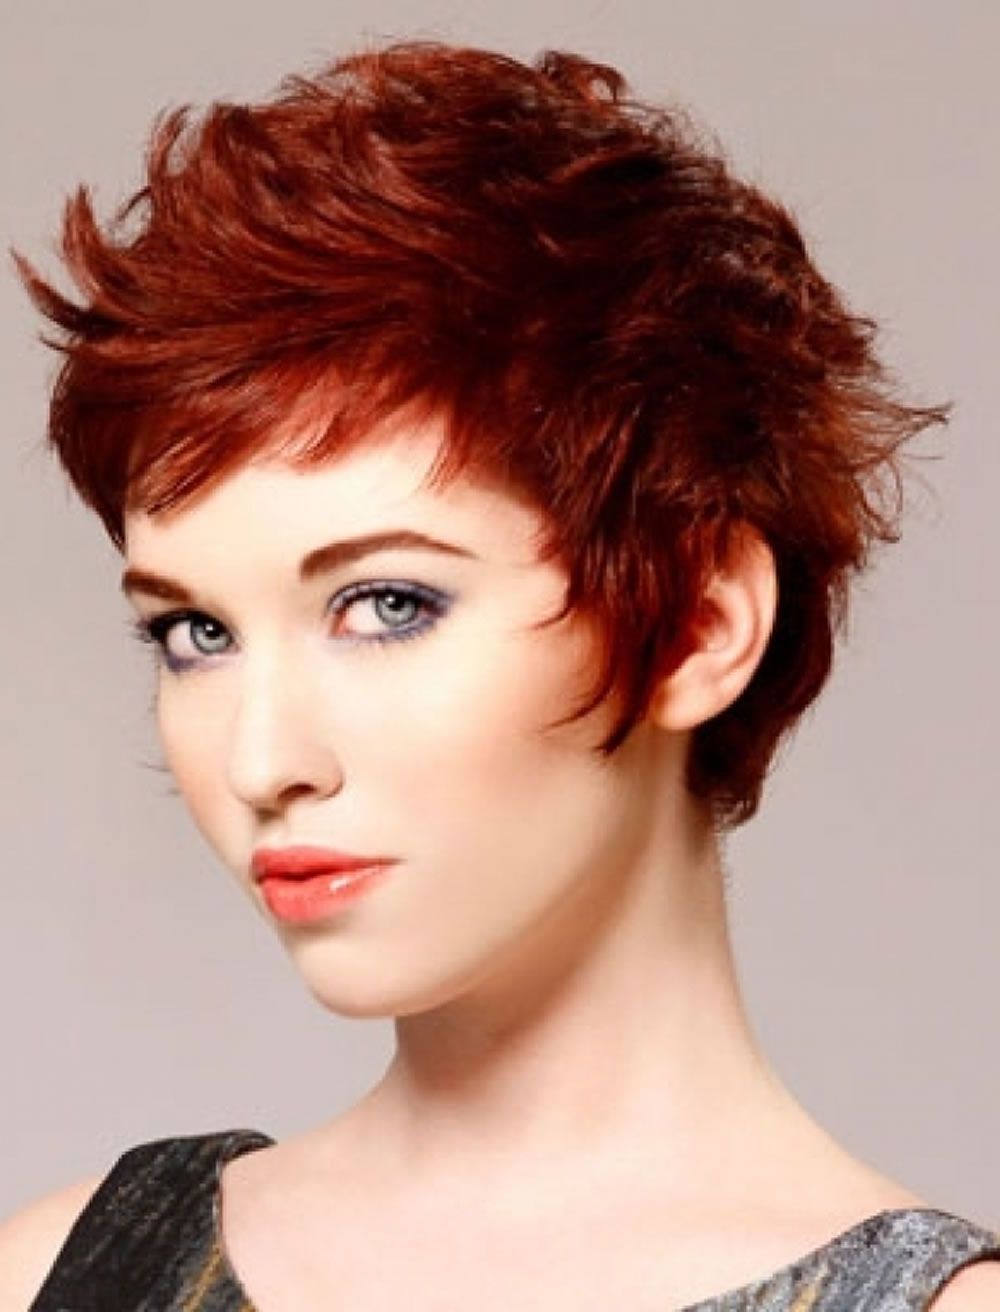 20 Short Haircuts For Red Hair New Design | Matsnilssonmma With Short Haircuts With Red Hair (View 5 of 25)